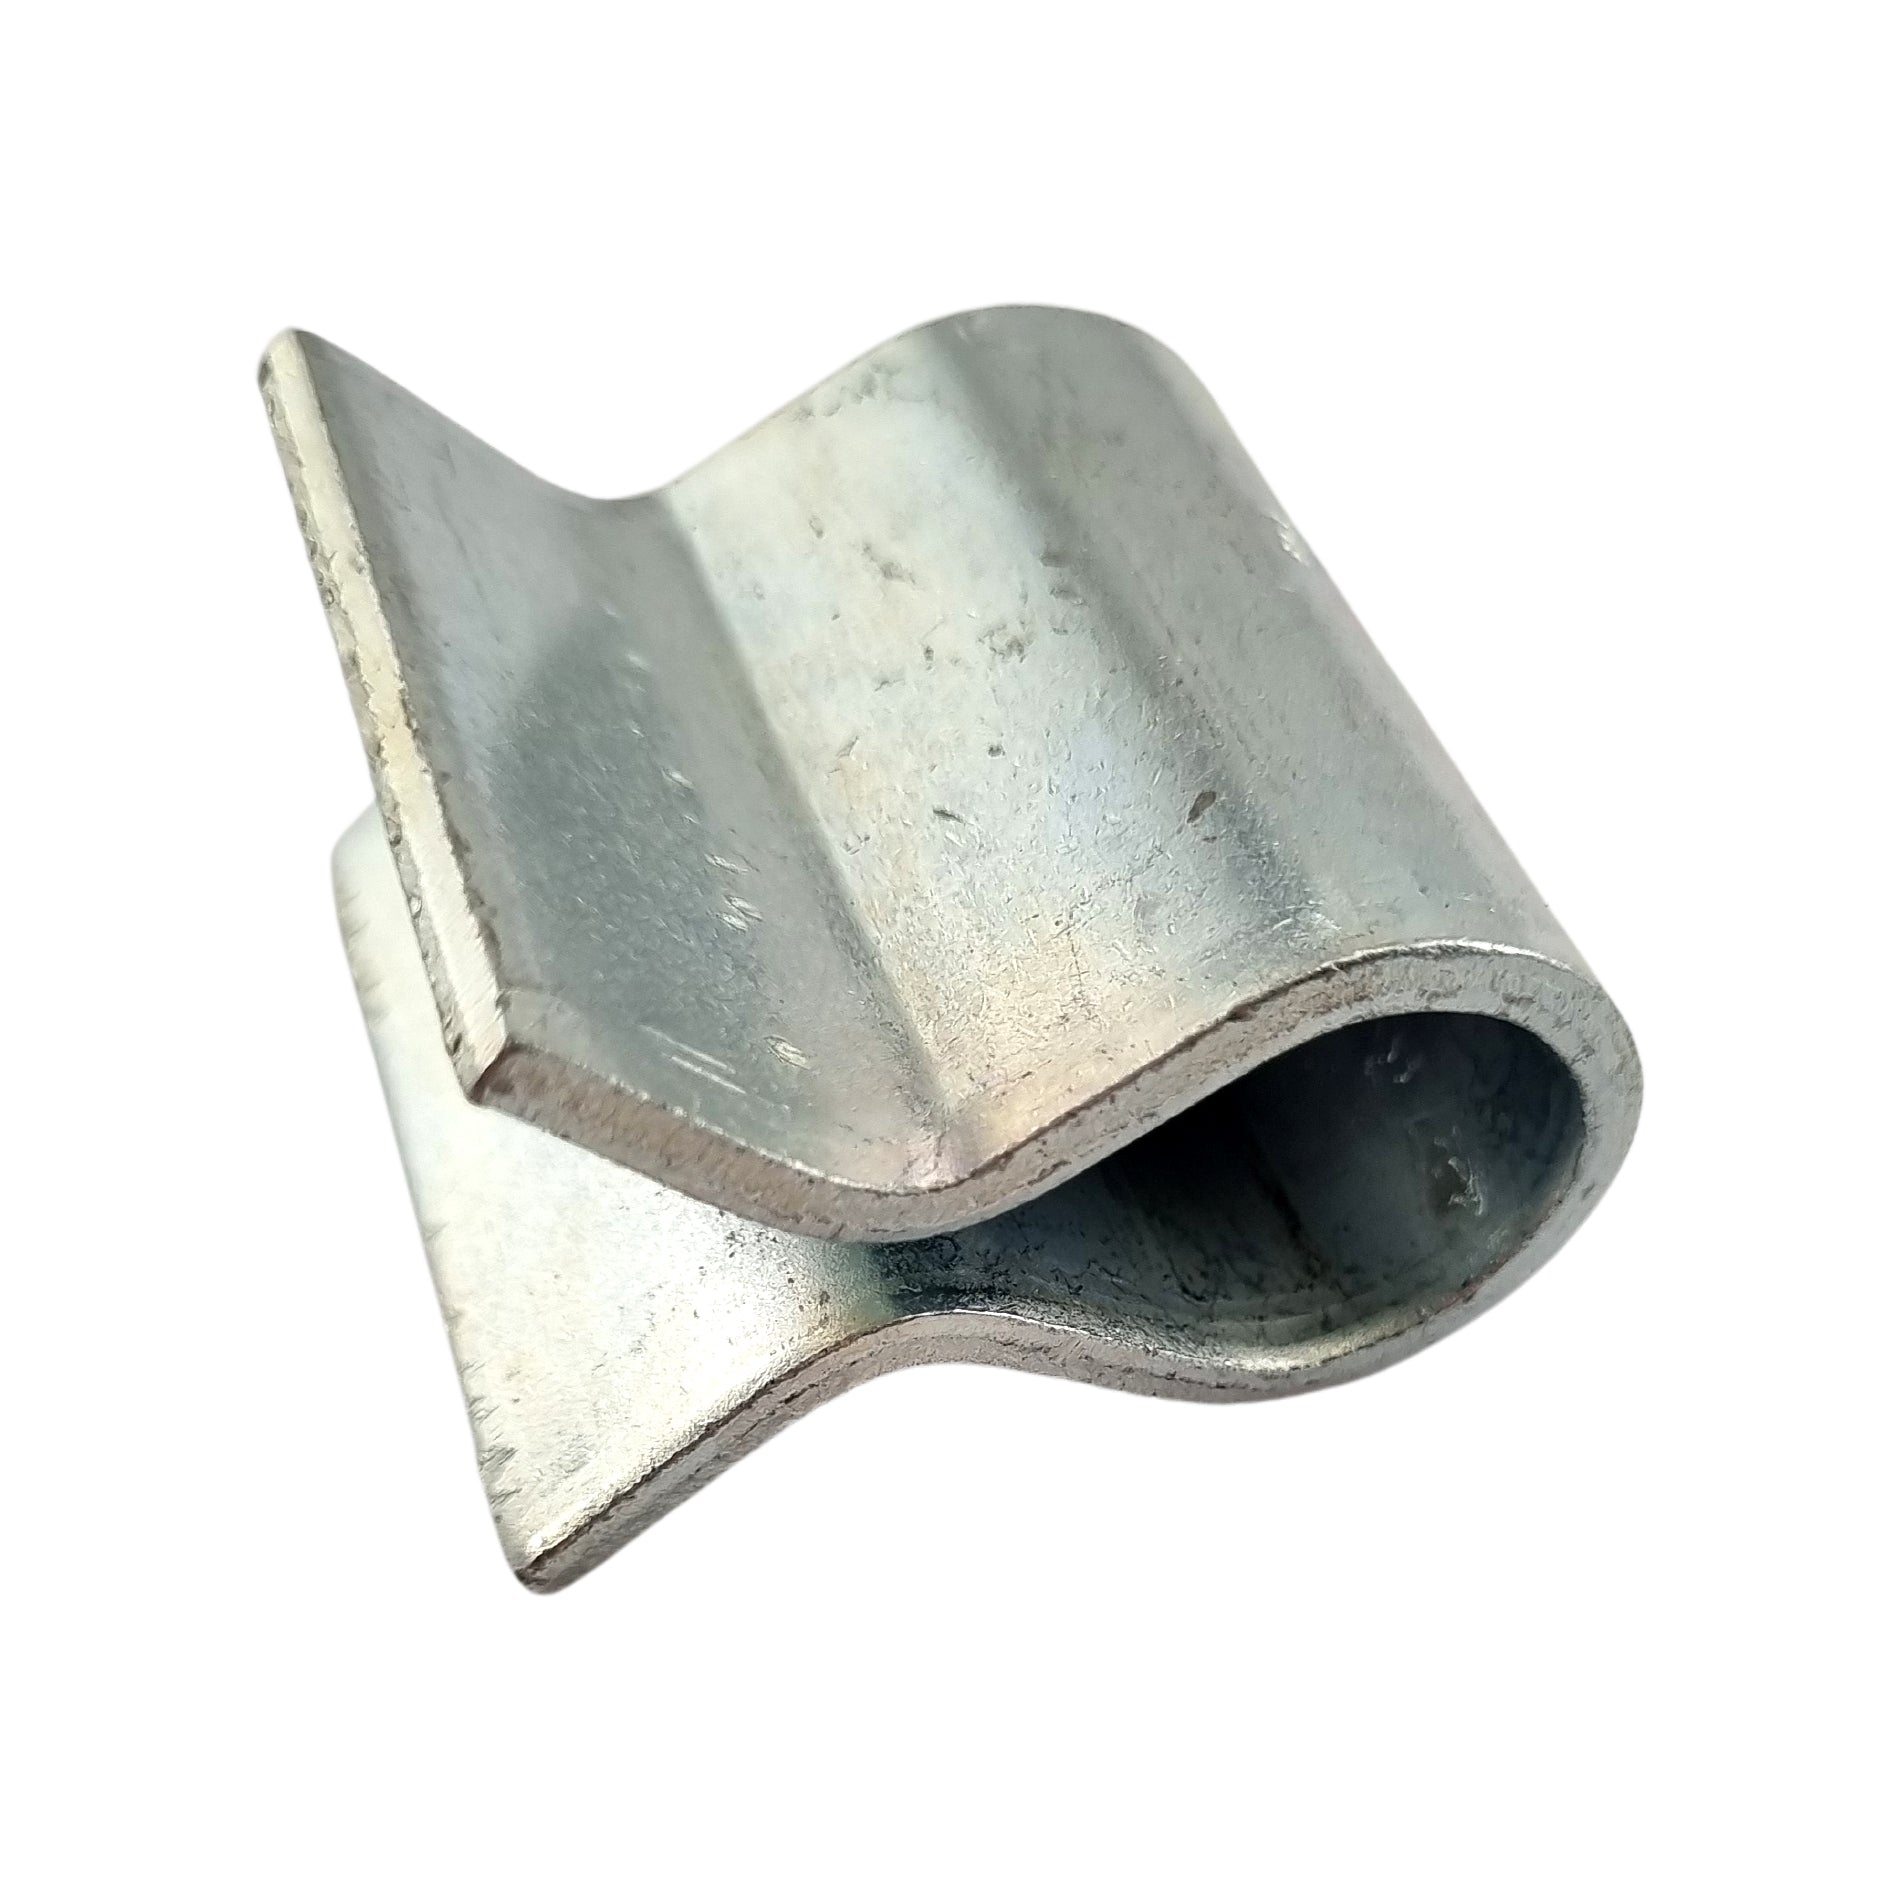 Weld On Socket - Zinc Plated. Australian made. Shop fence and gate fittings online. Chain.com.au. Australia wide shipping.